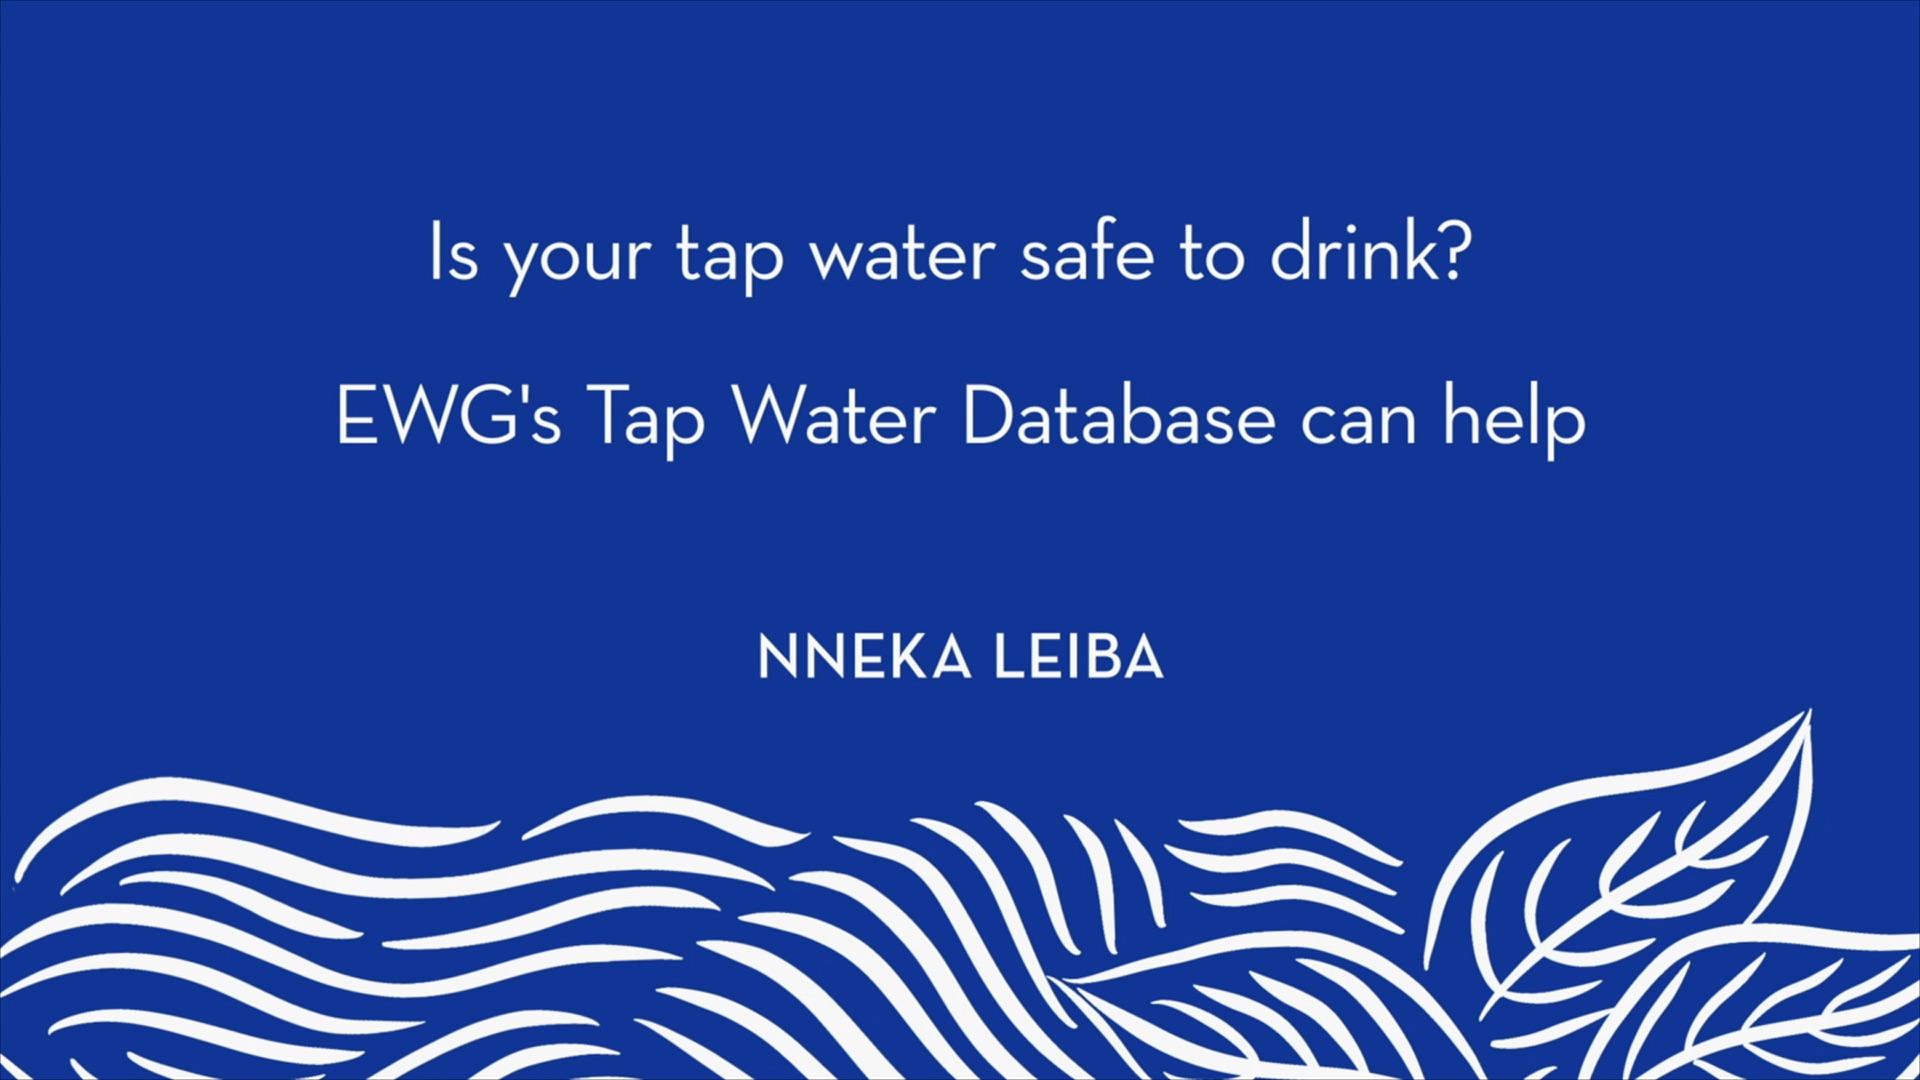 Nneka Leiba | Is your tap water safe to drink? EWG's Tap Water Database can help